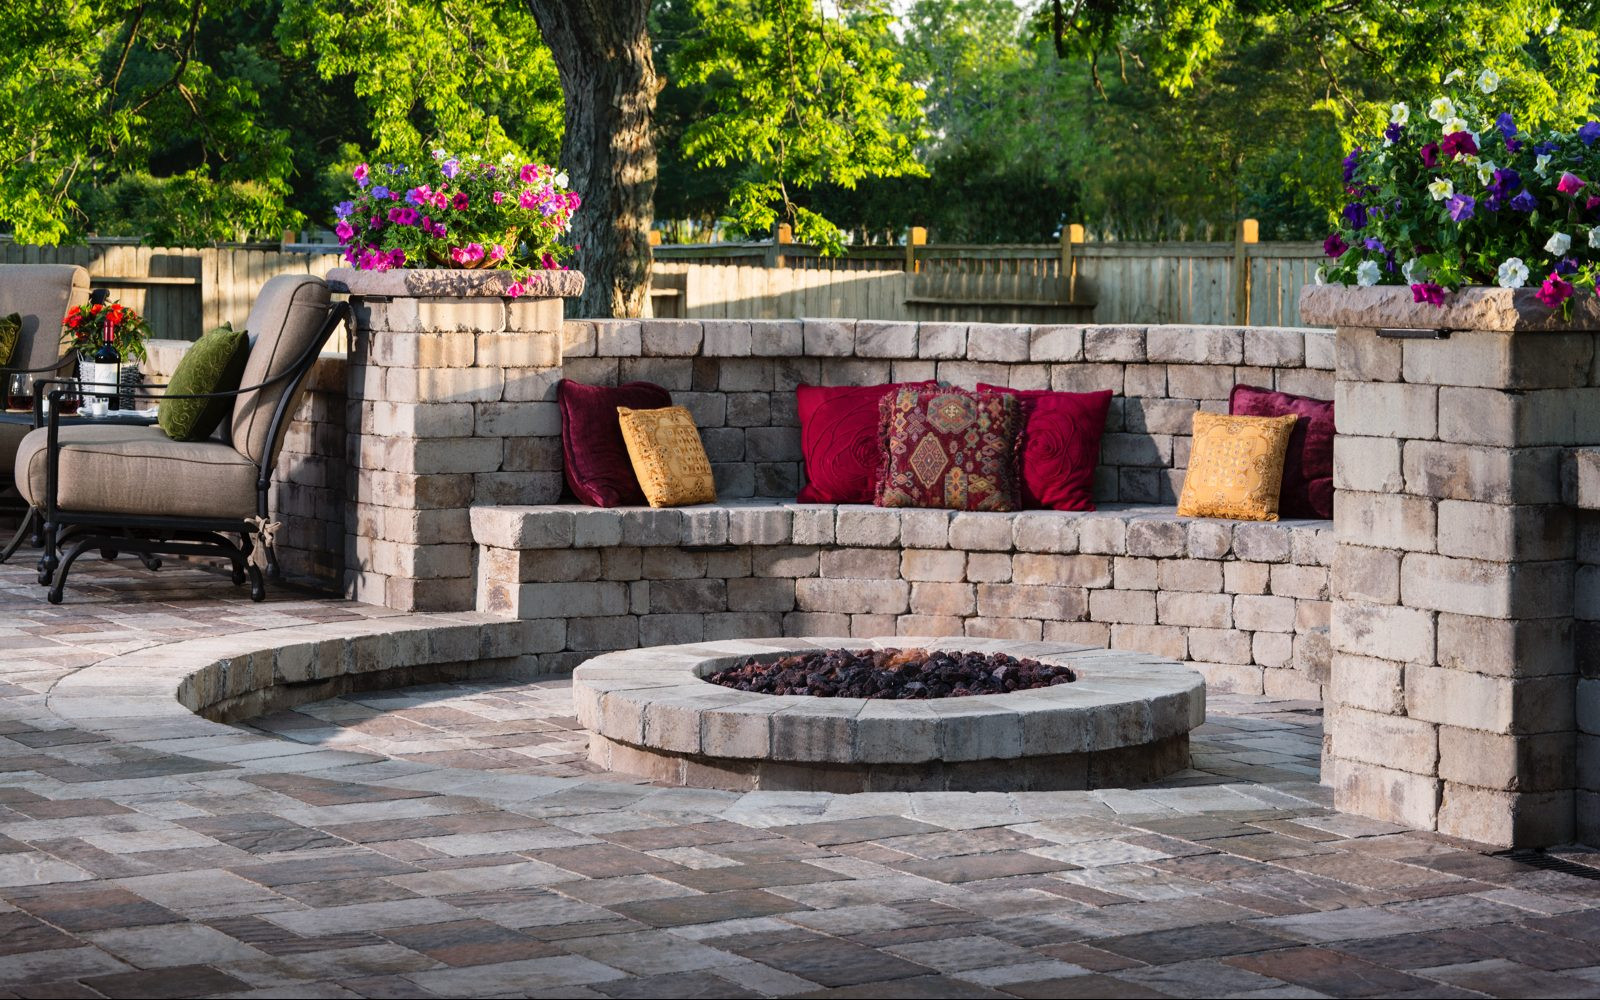 Stone Patio With Fire Pit
 Turn Up the Heat with These Cozy Fire Pit Patio Design